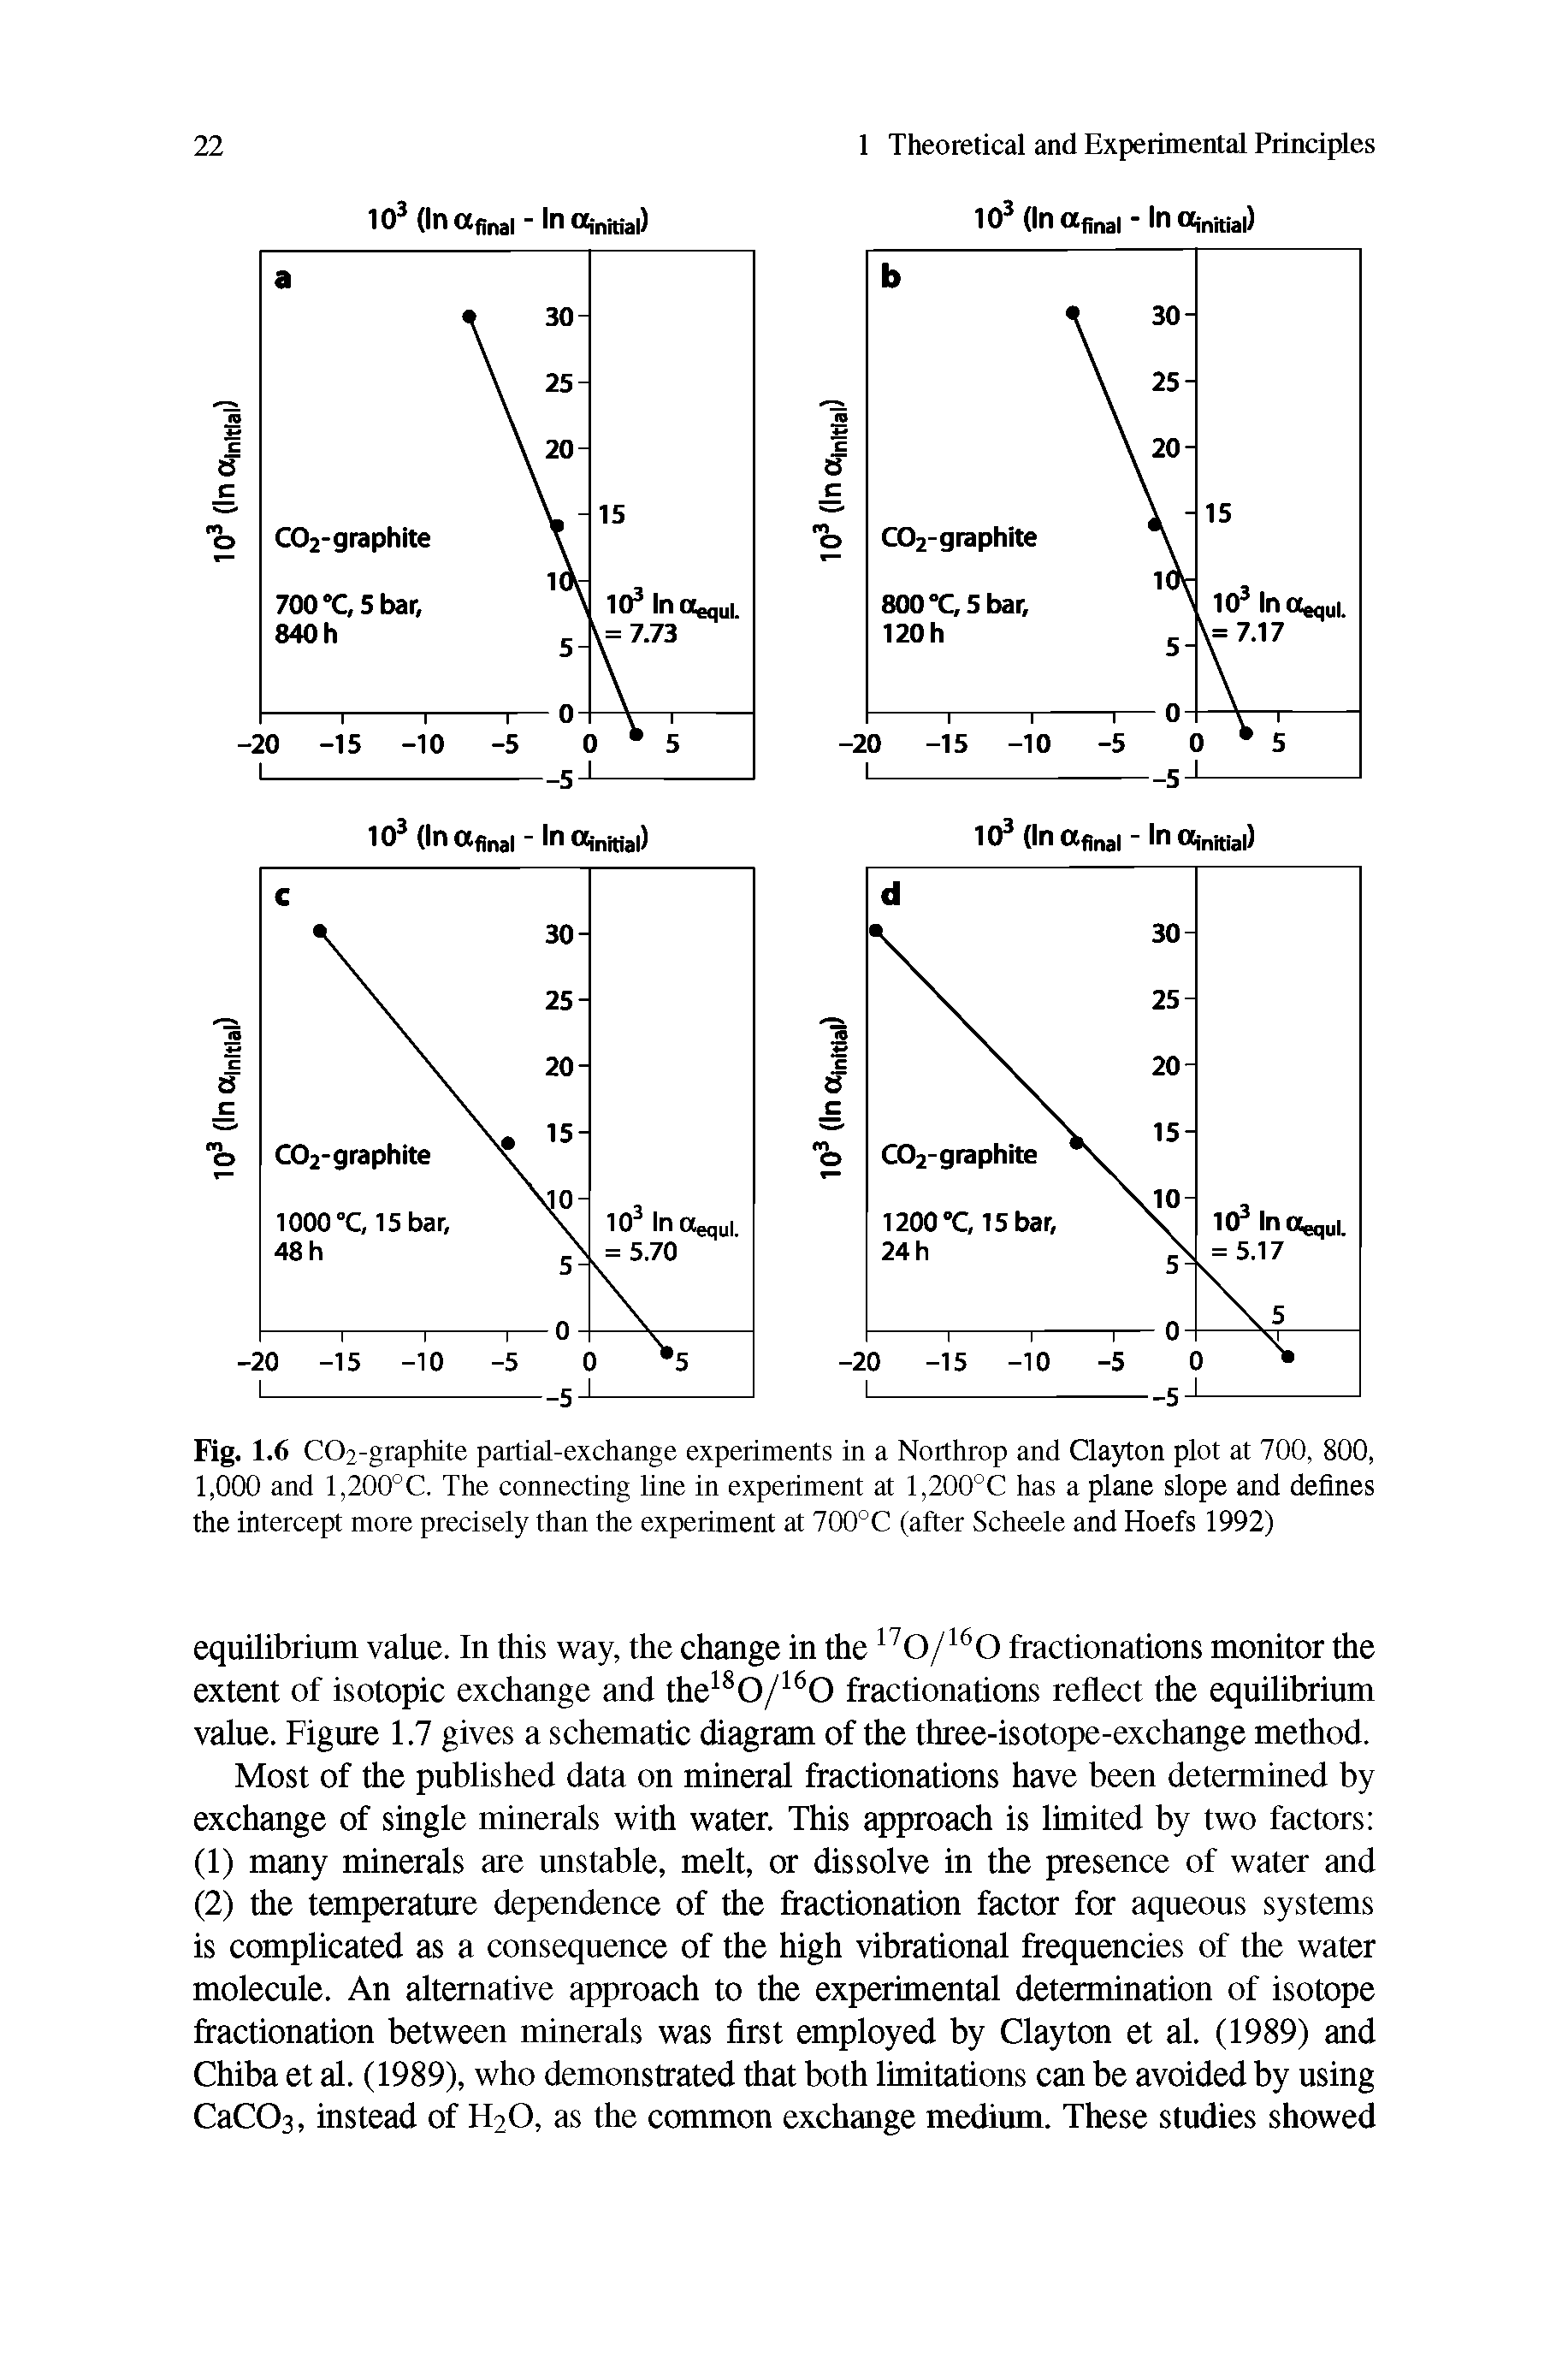 Fig. 1.6 C02-graphite partial-exchange experiments in a Northrop and Clayton plot at 700, 800, 1,000 and 1,200°C, The connecting line in experiment at 1,200°C has a plane slope and defines the intercept more precisely than the experiment at 700°C (after Scheele and Hoefs 1992)...